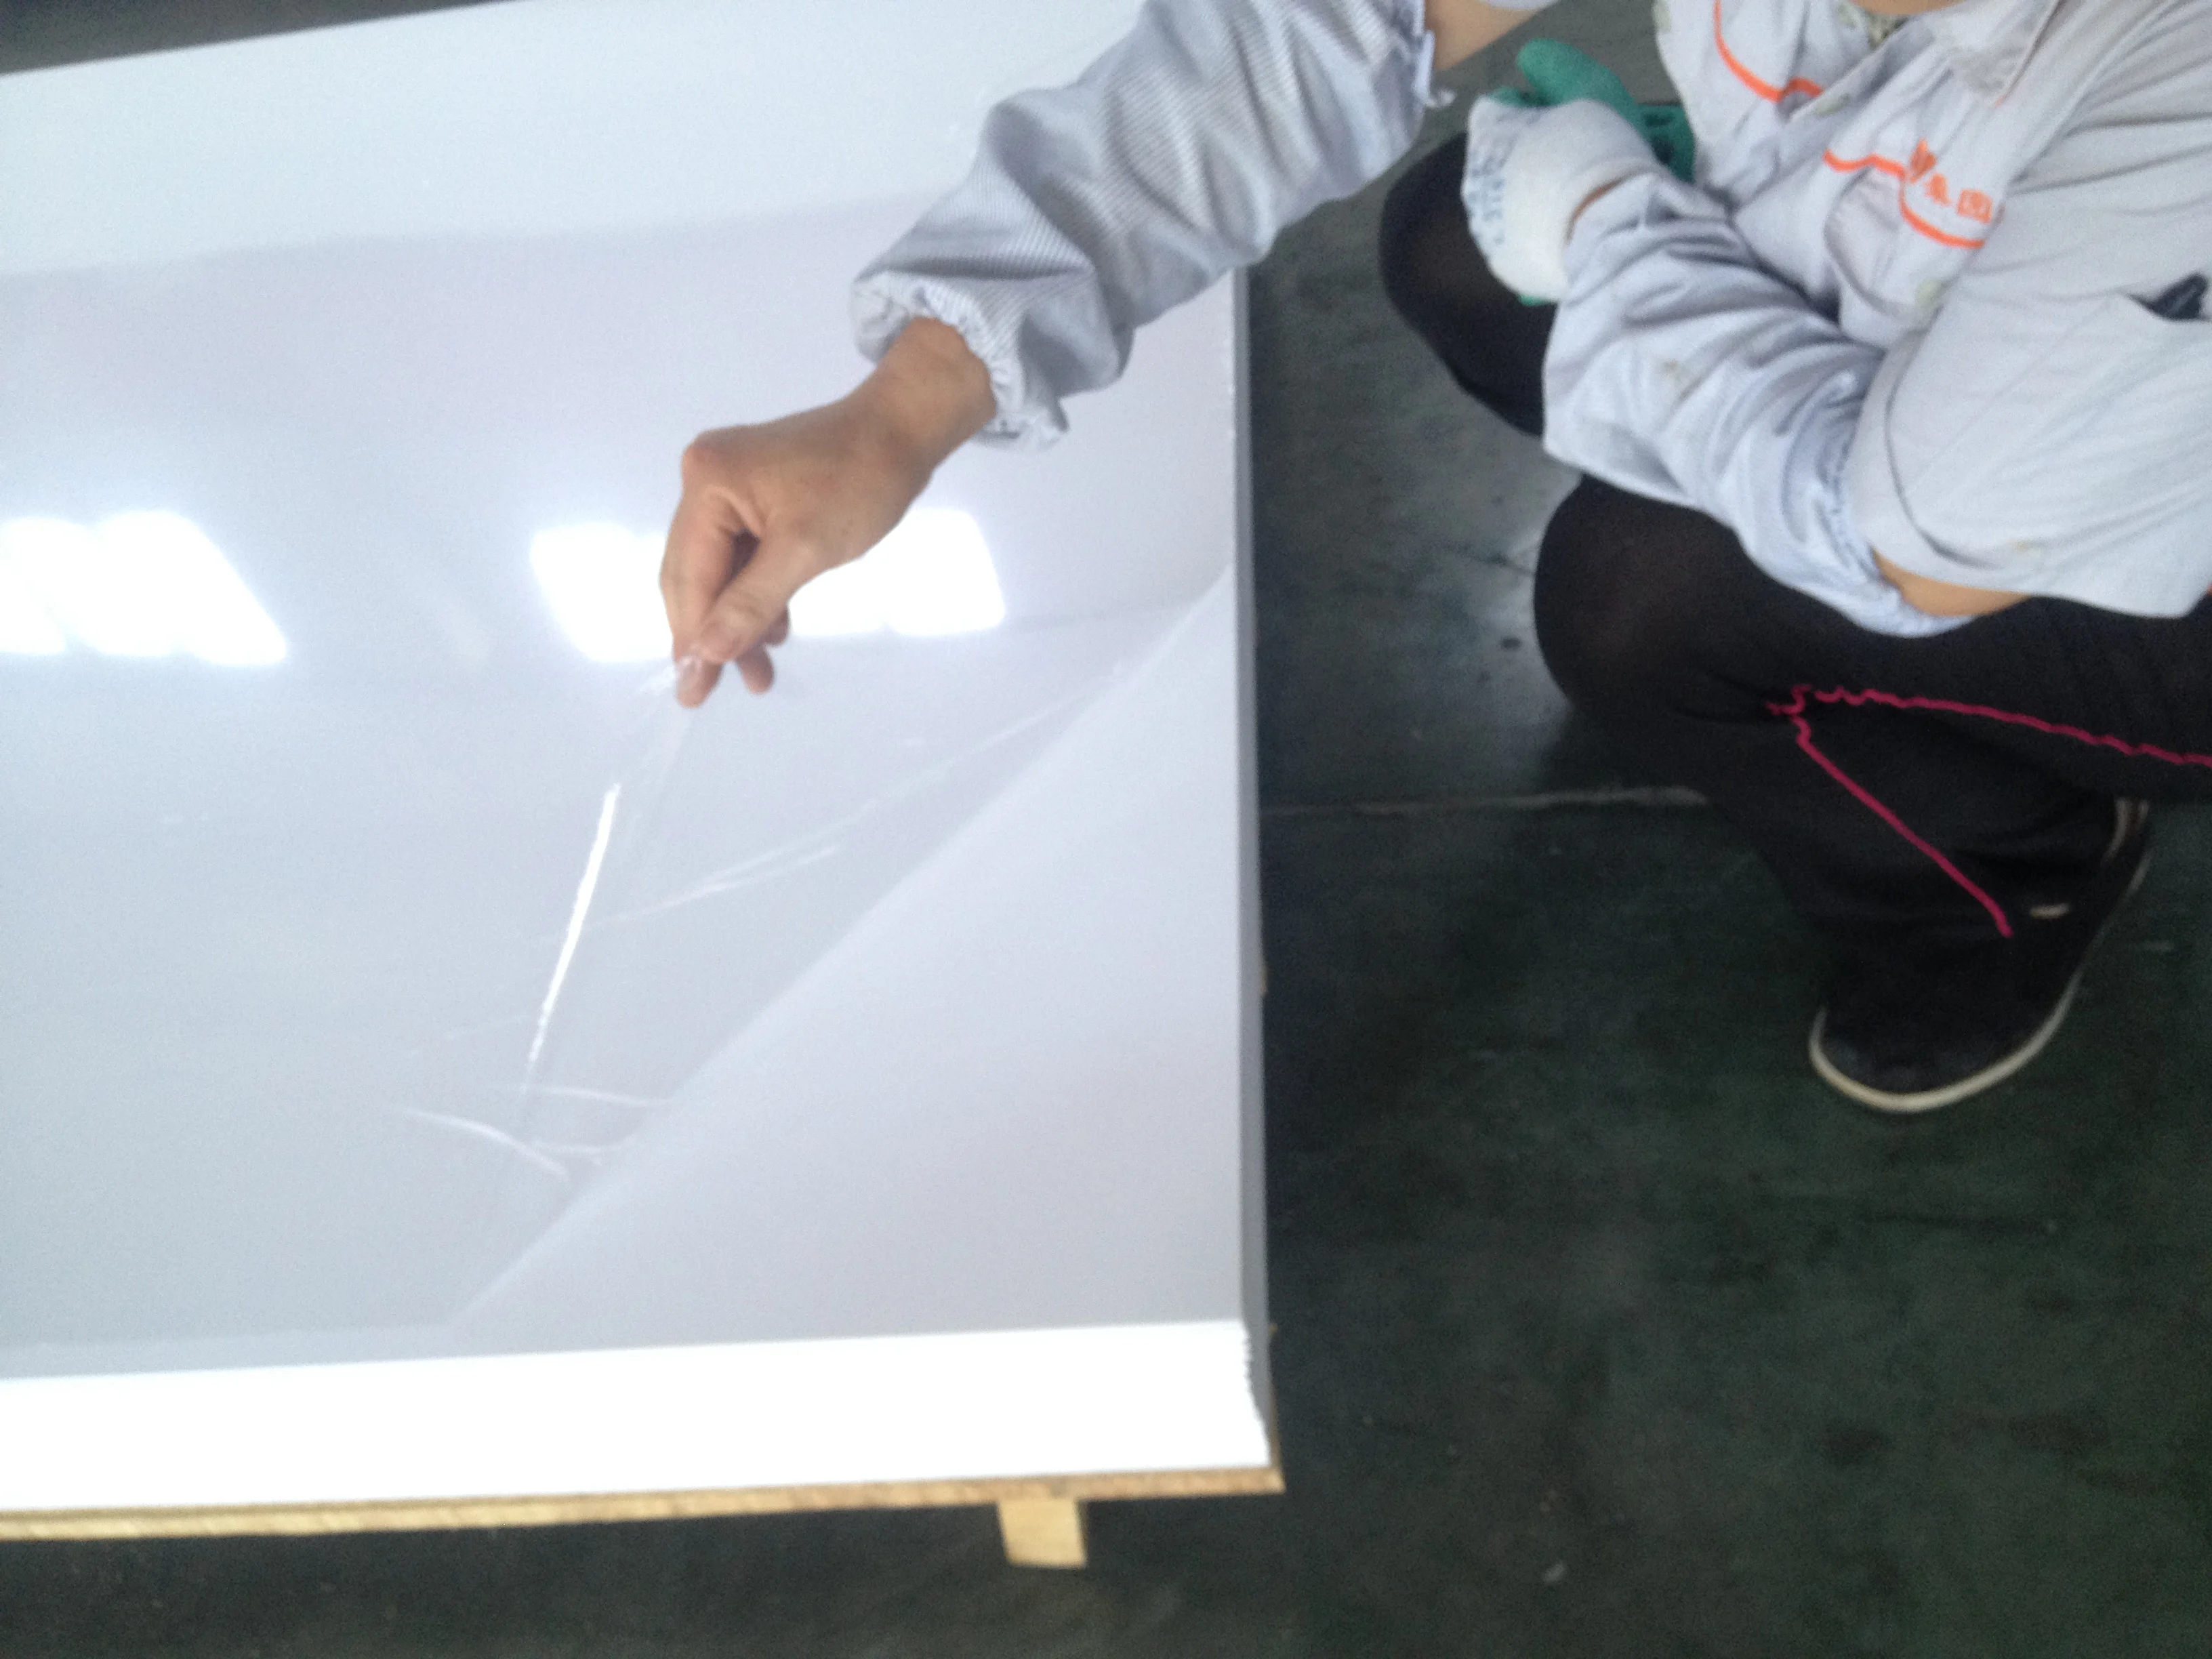 50mm thickness pvc sheets